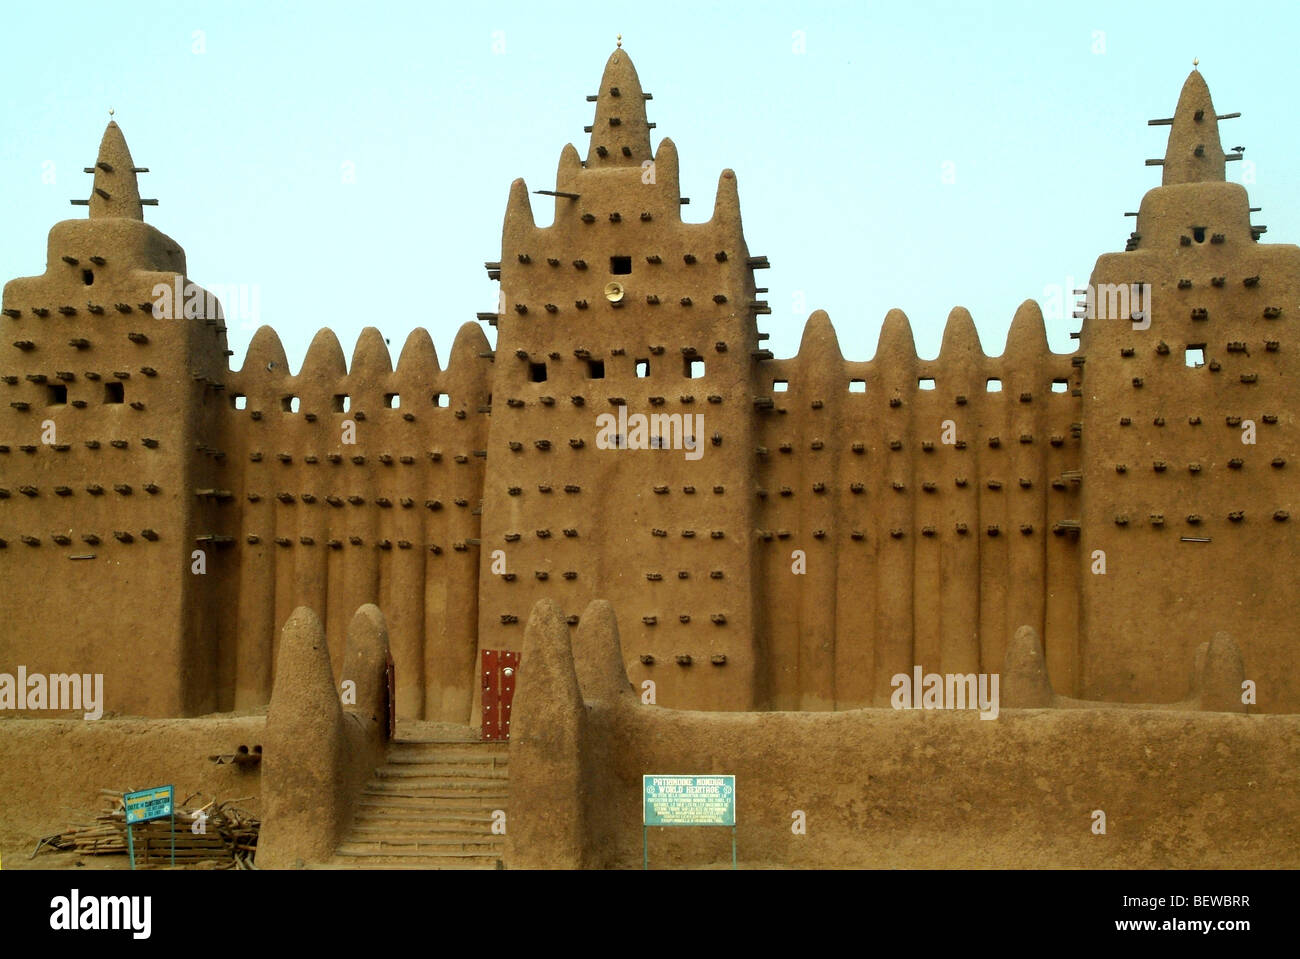 Facade of the Great Mosque in Djenne, Mali Stock Photo